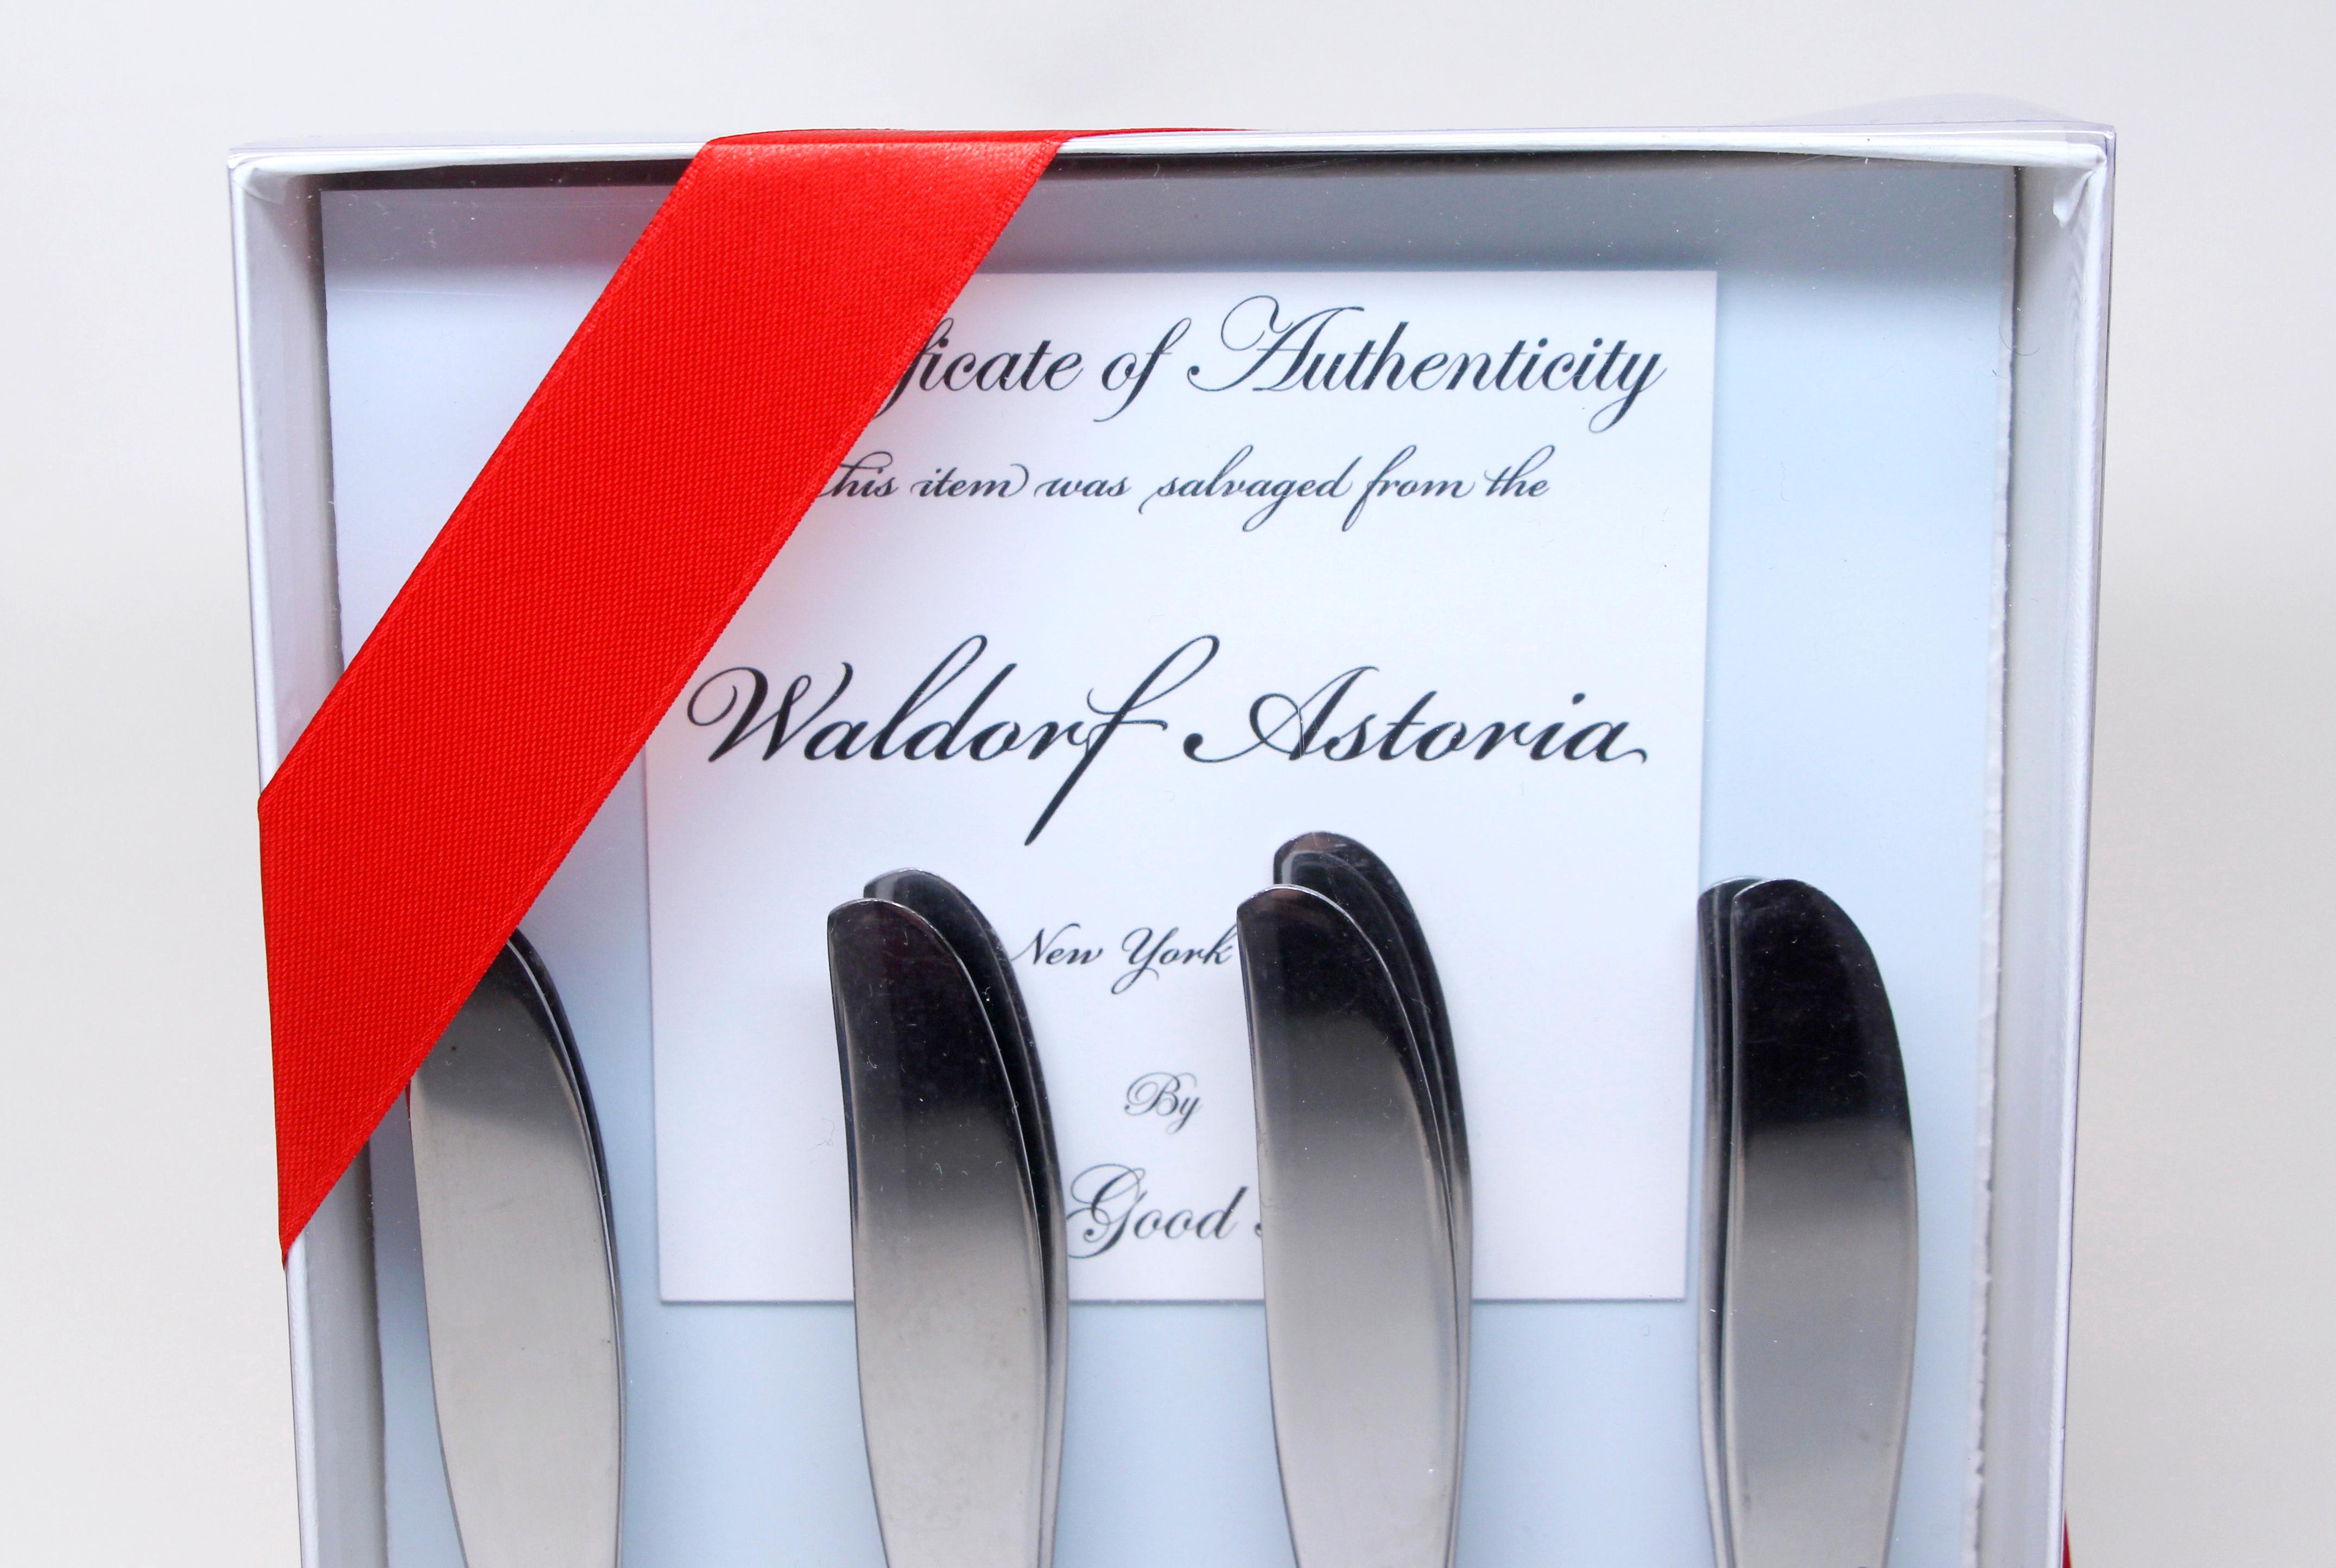 1990s silver plated steel eight piece used fish knife and fork set. Made by Oneida. This item is original to the NYC Waldorf Astoria Hotel Towers. All pieces are stamped “Waldorf Astoria”. Priced per set. Waldorf Astoria authenticity card included